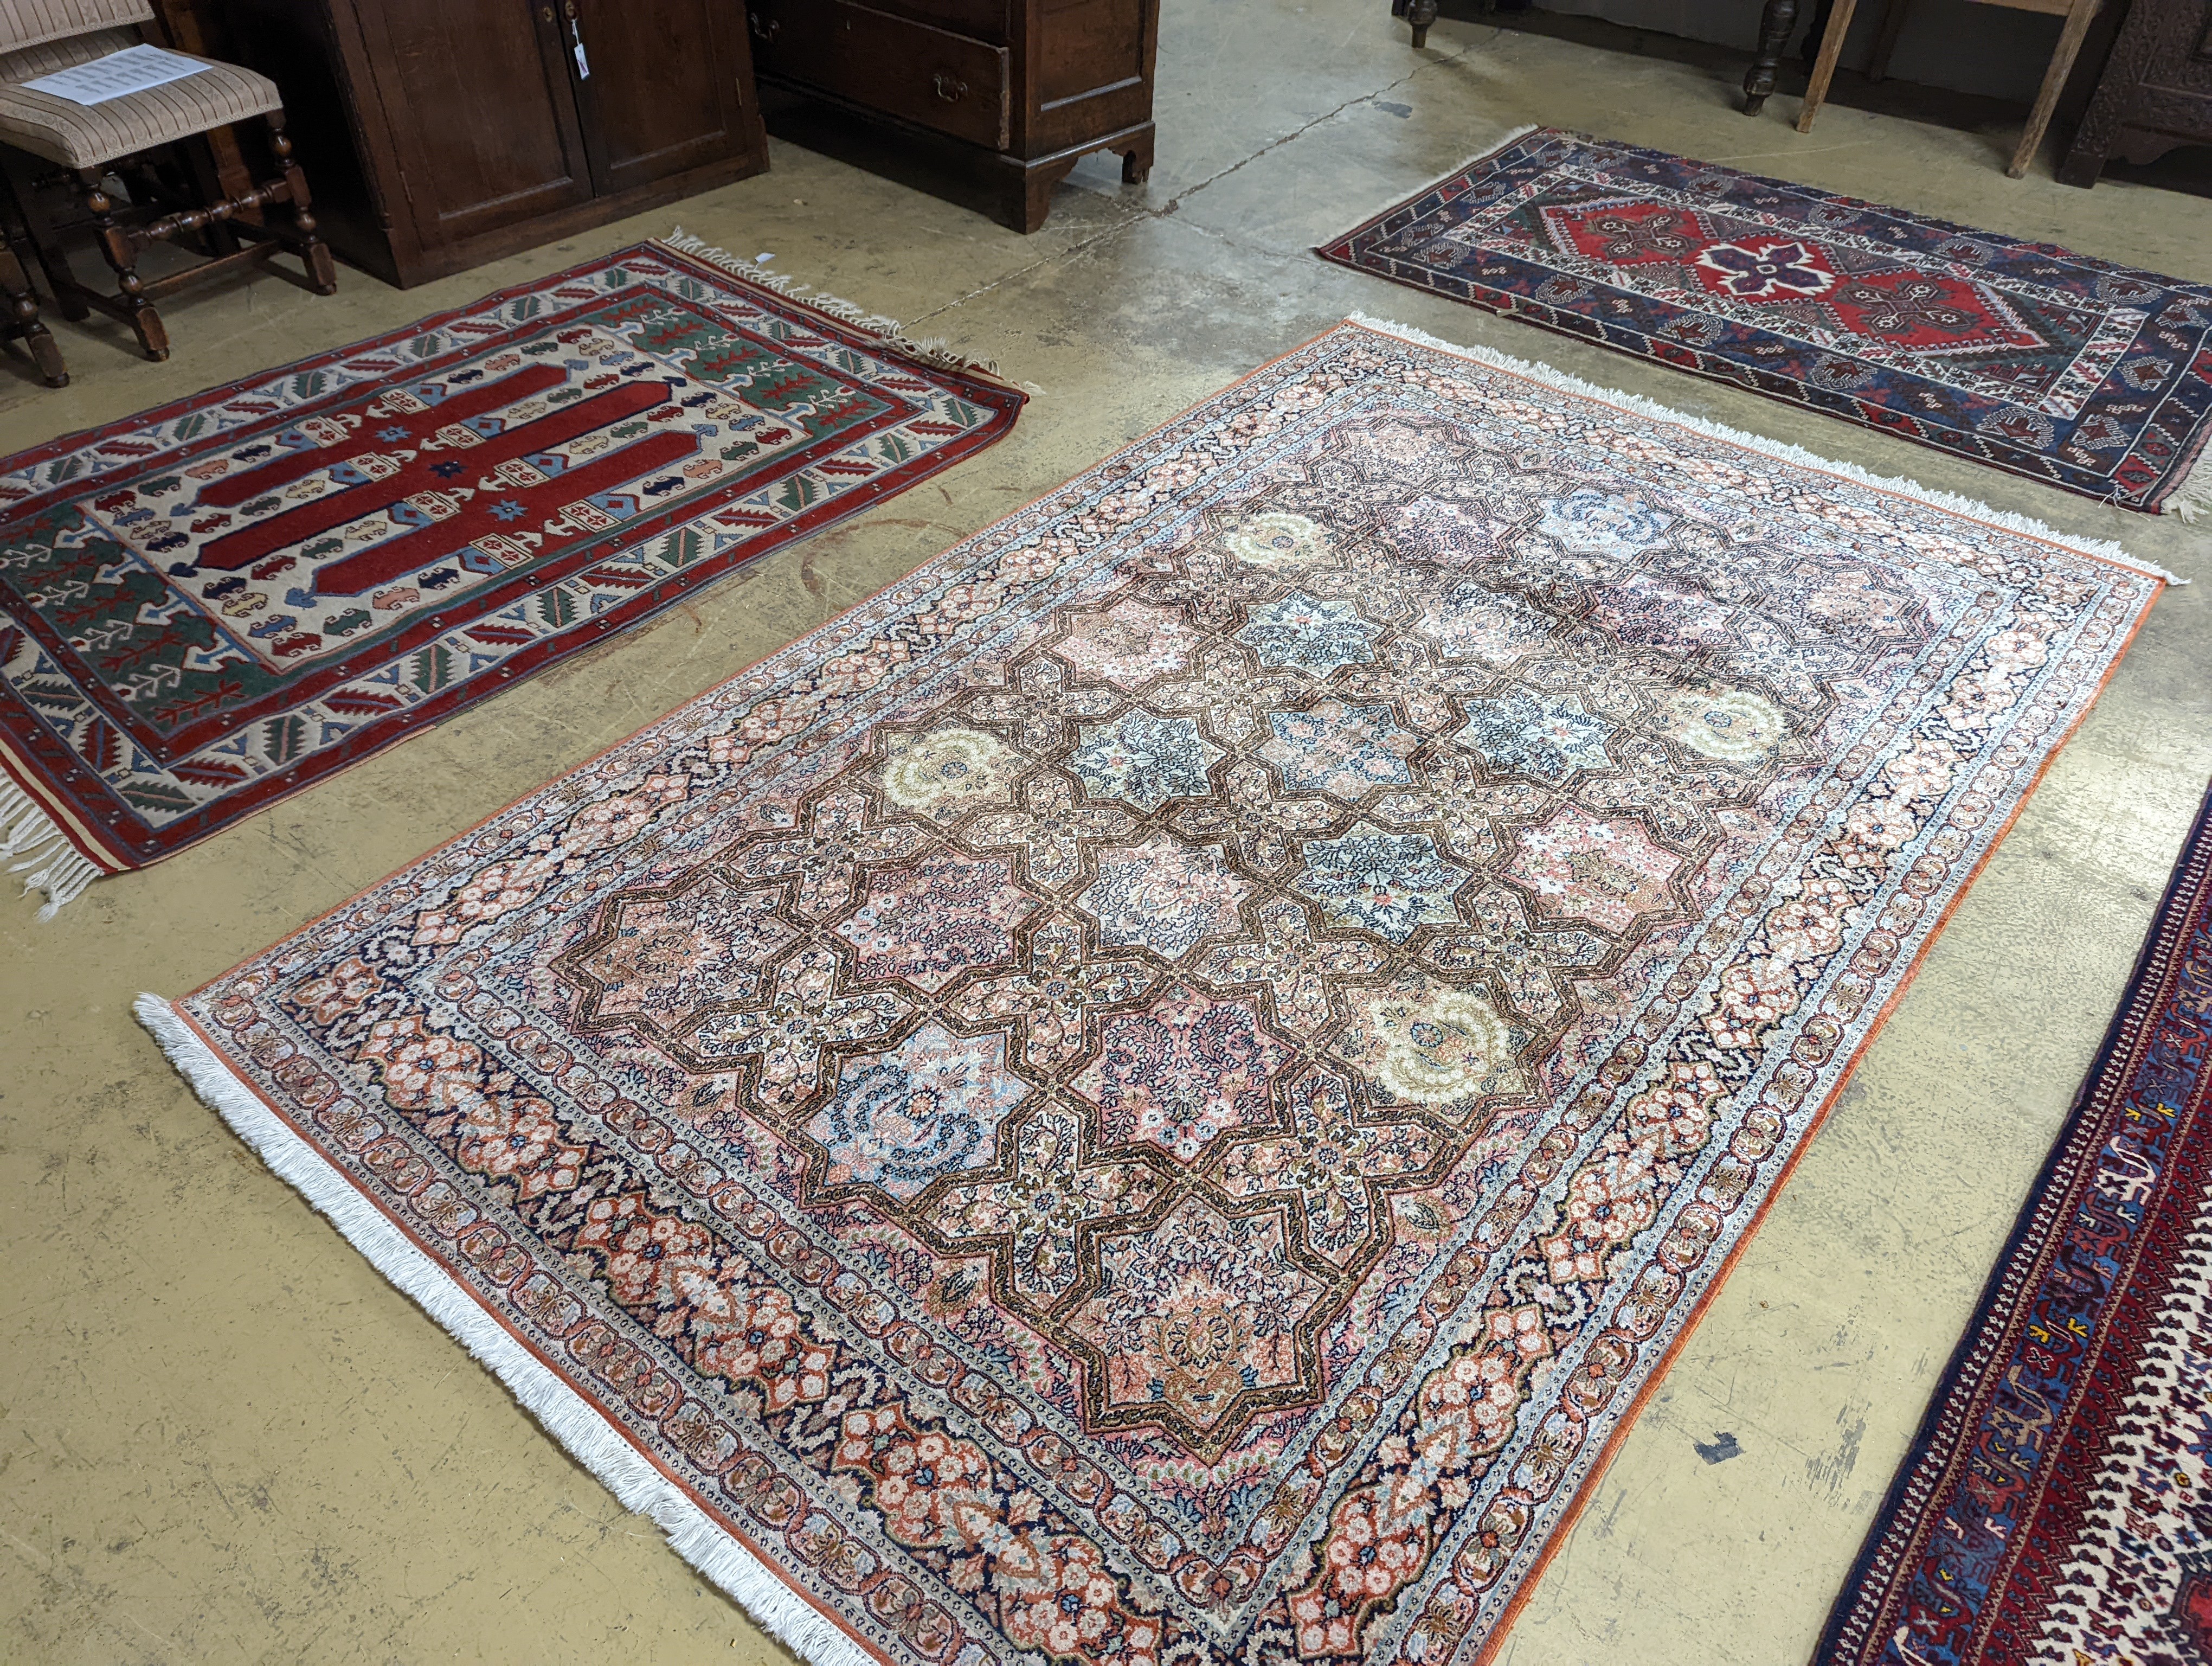 Two Turkish rugs and a Persian rugs. Largest, 284x172cm.